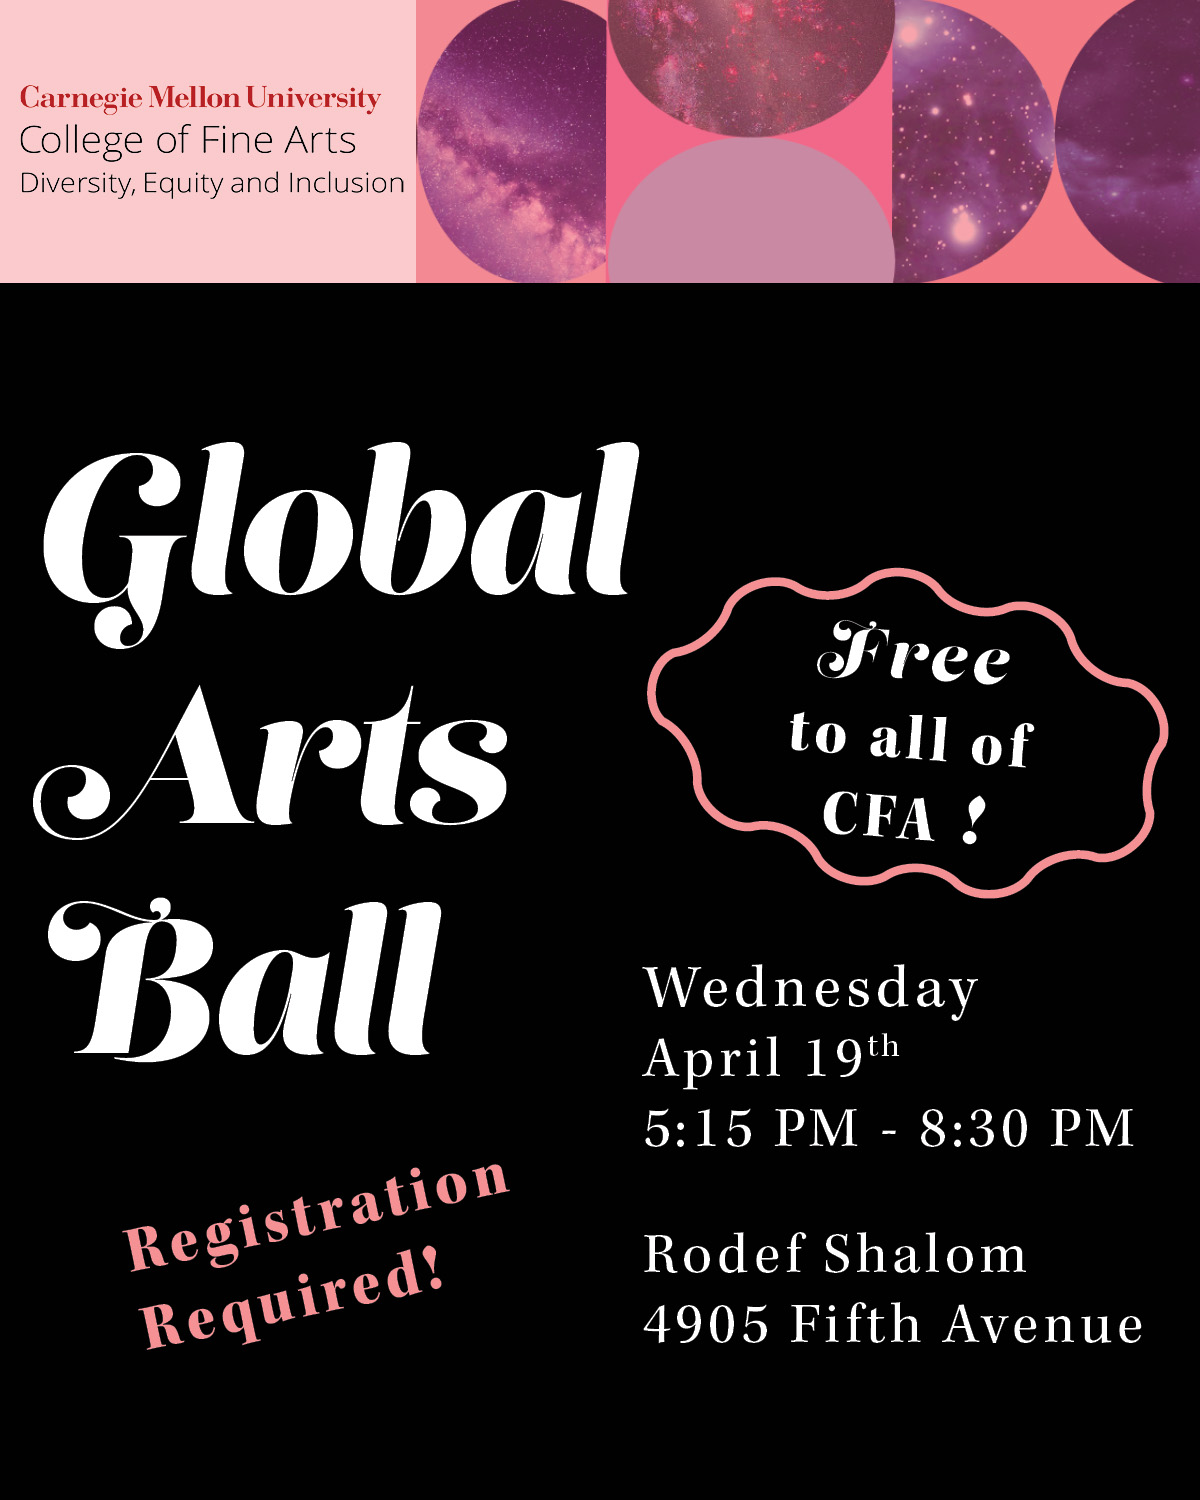 CMU CFA DEI Global Arts Ball. Free to all of CFA! Registration required! Wednesday April 19th, 5:15pm–8:30pm. Rodef Shalom, 4905 Fifth Ave.